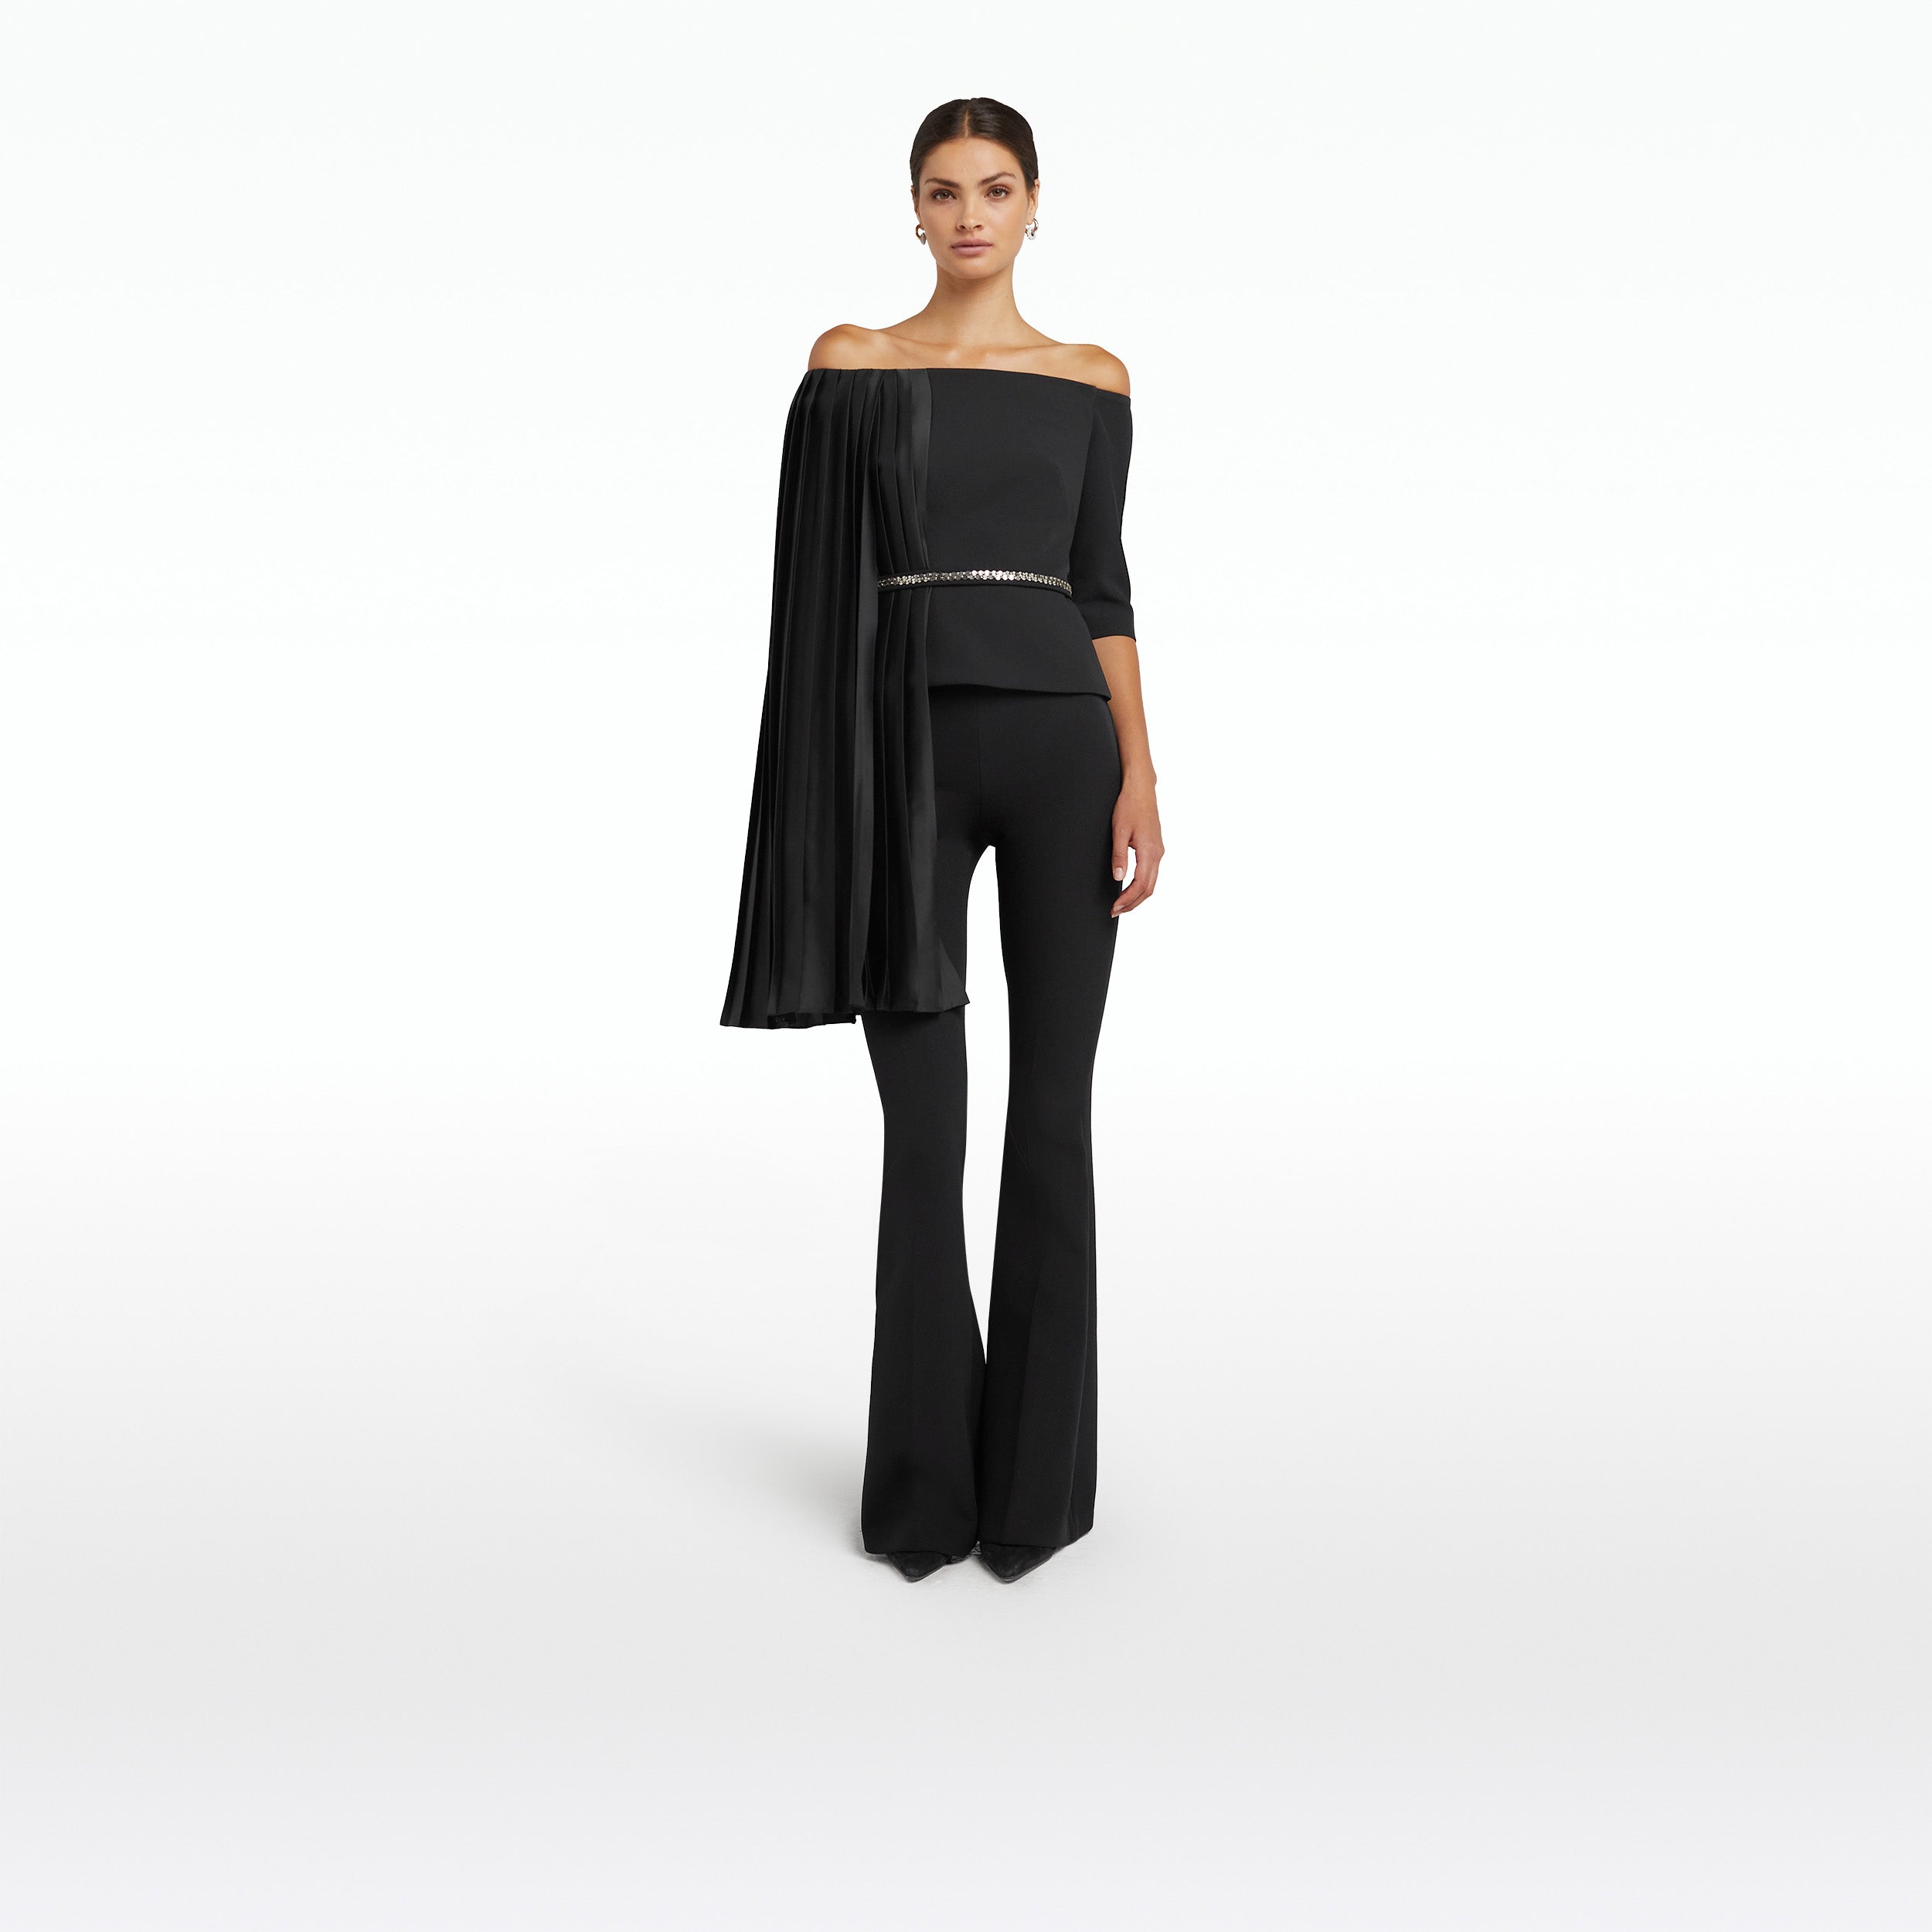 Emer Black Top With Embroidered Belt